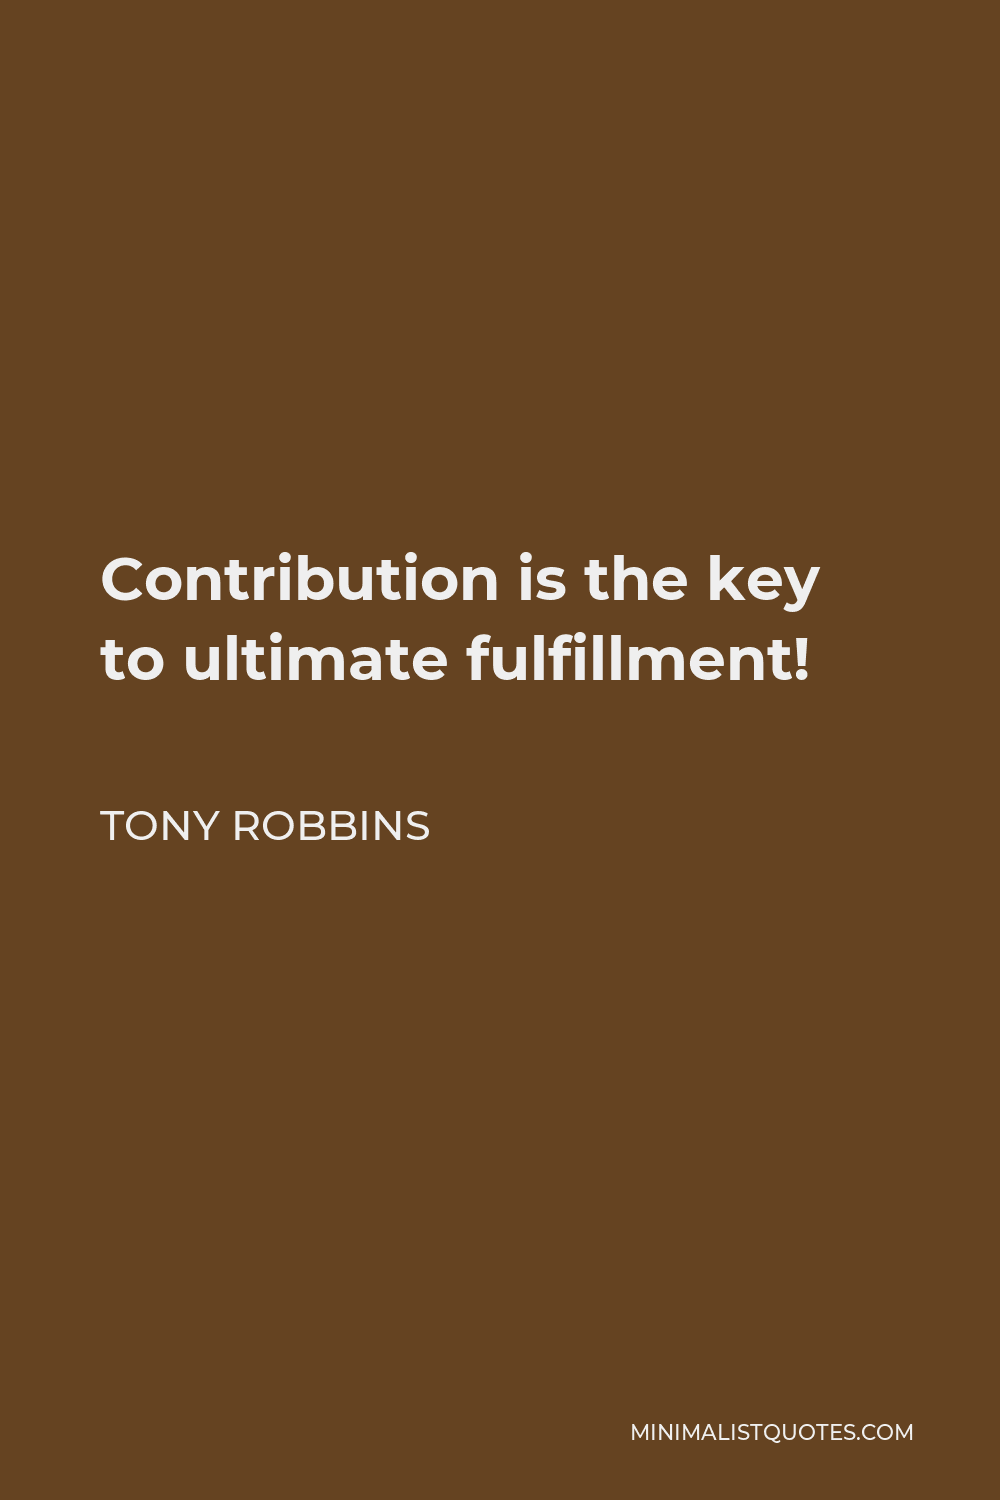 Tony Robbins Quote - Contribution is the key to ultimate fulfillment!